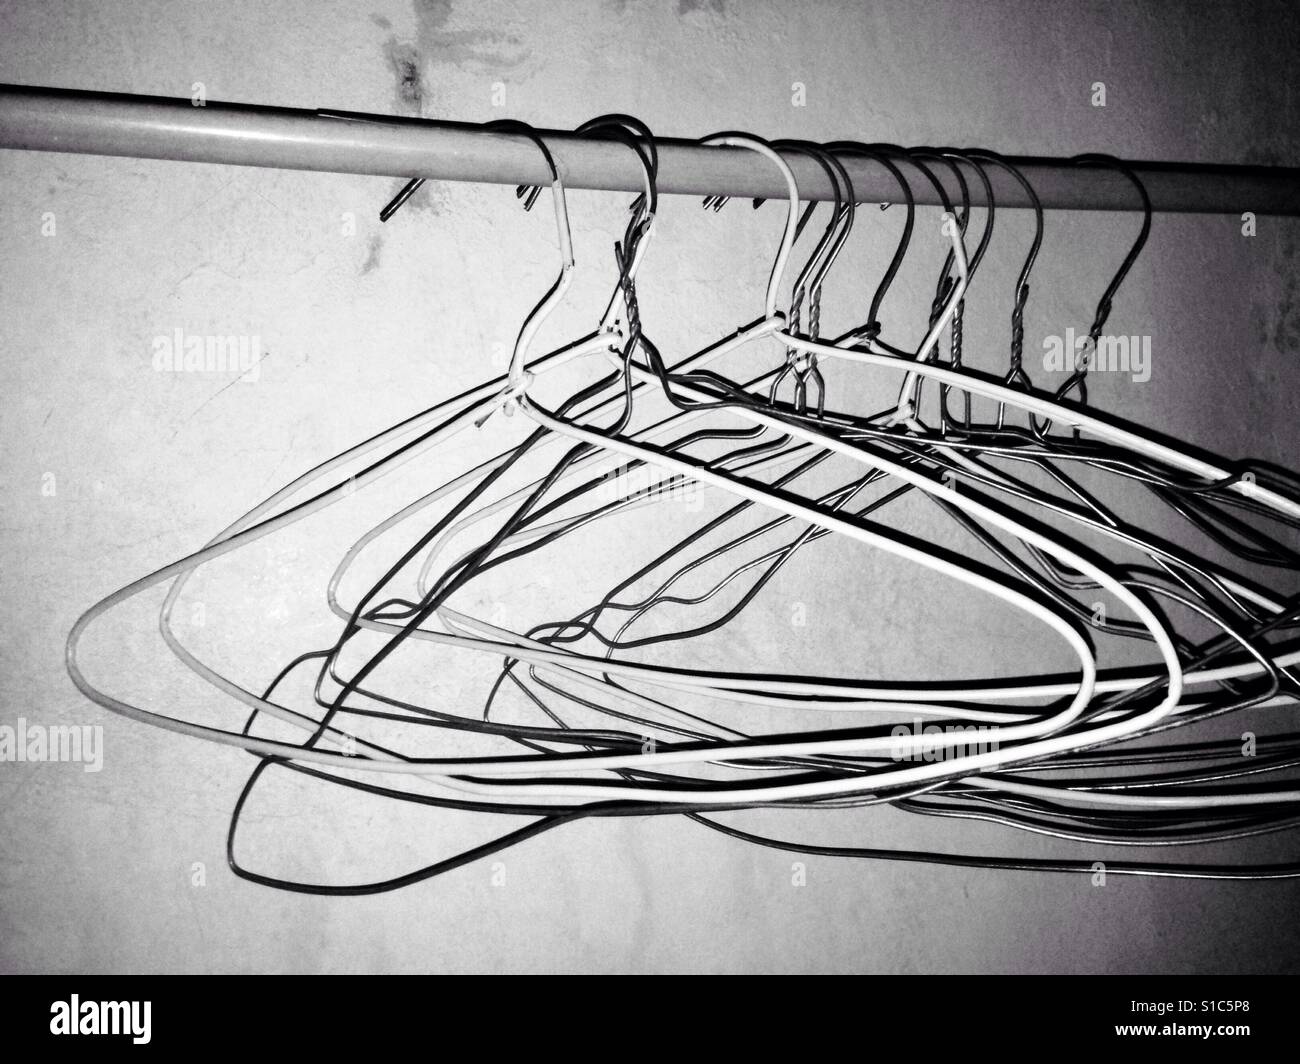 Old Hangers on Hangers Stand - Black and White Stock Photo